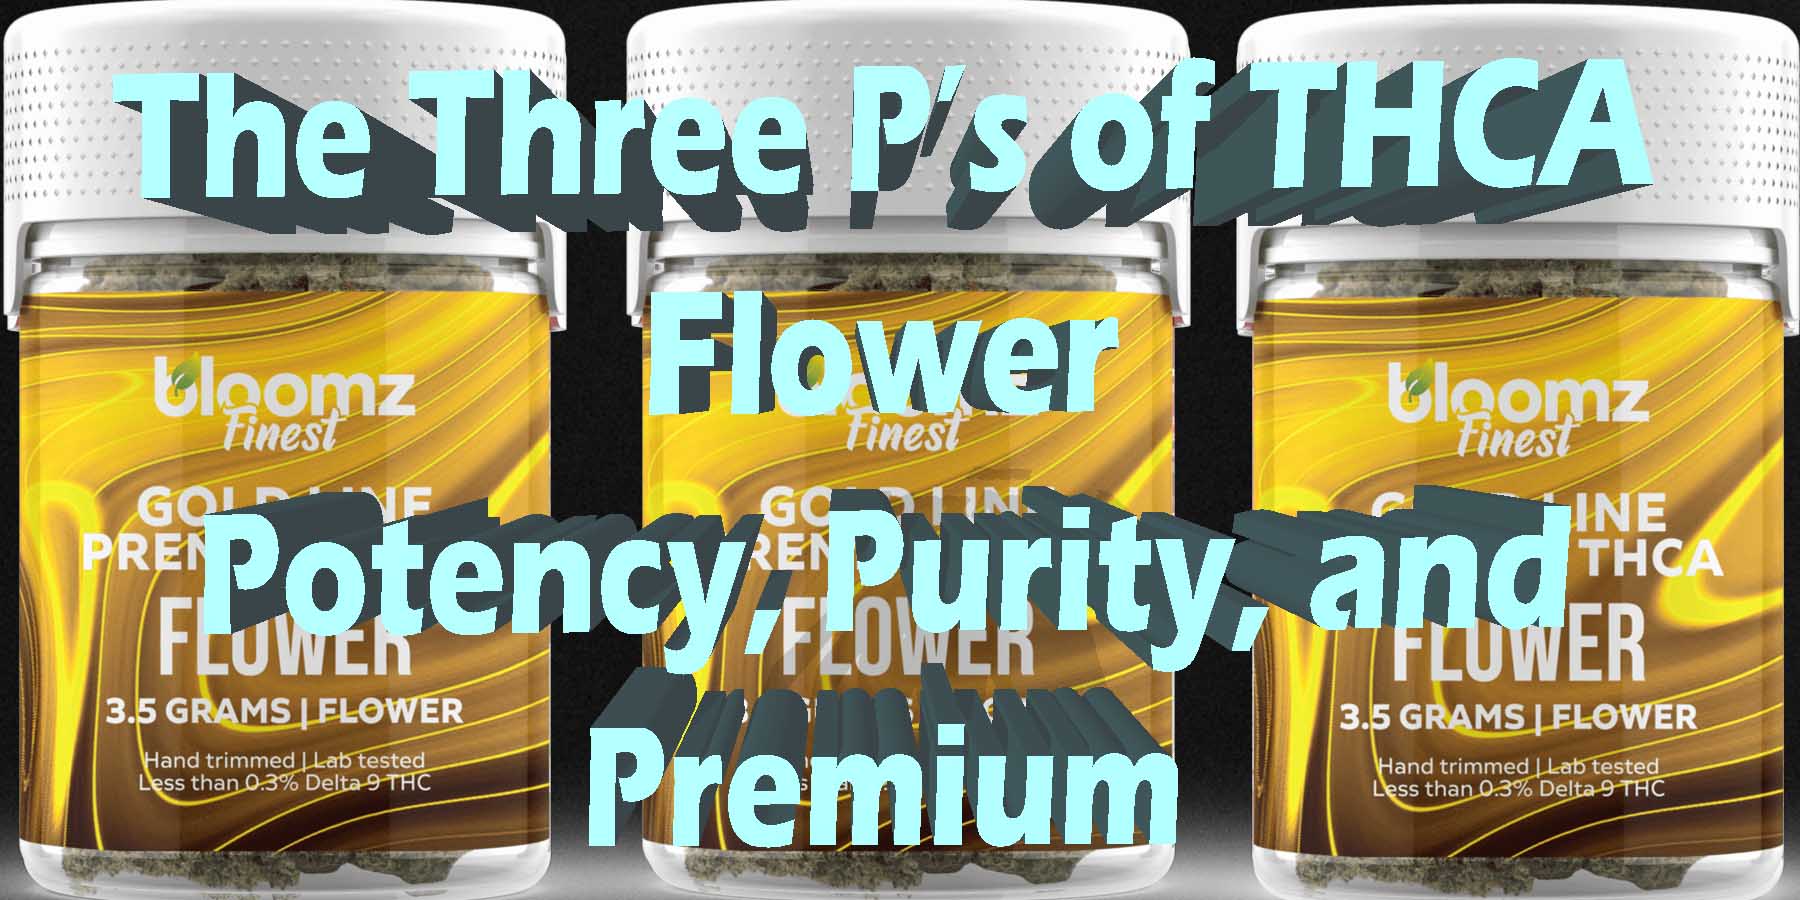 The Three Ps of THCA Flower Potency Purity and Premium WhereToGet HowToGetNearMe BestPlace LowestPrice Coupon Discount For Smoking Best High Smoke Shop Online Near Me